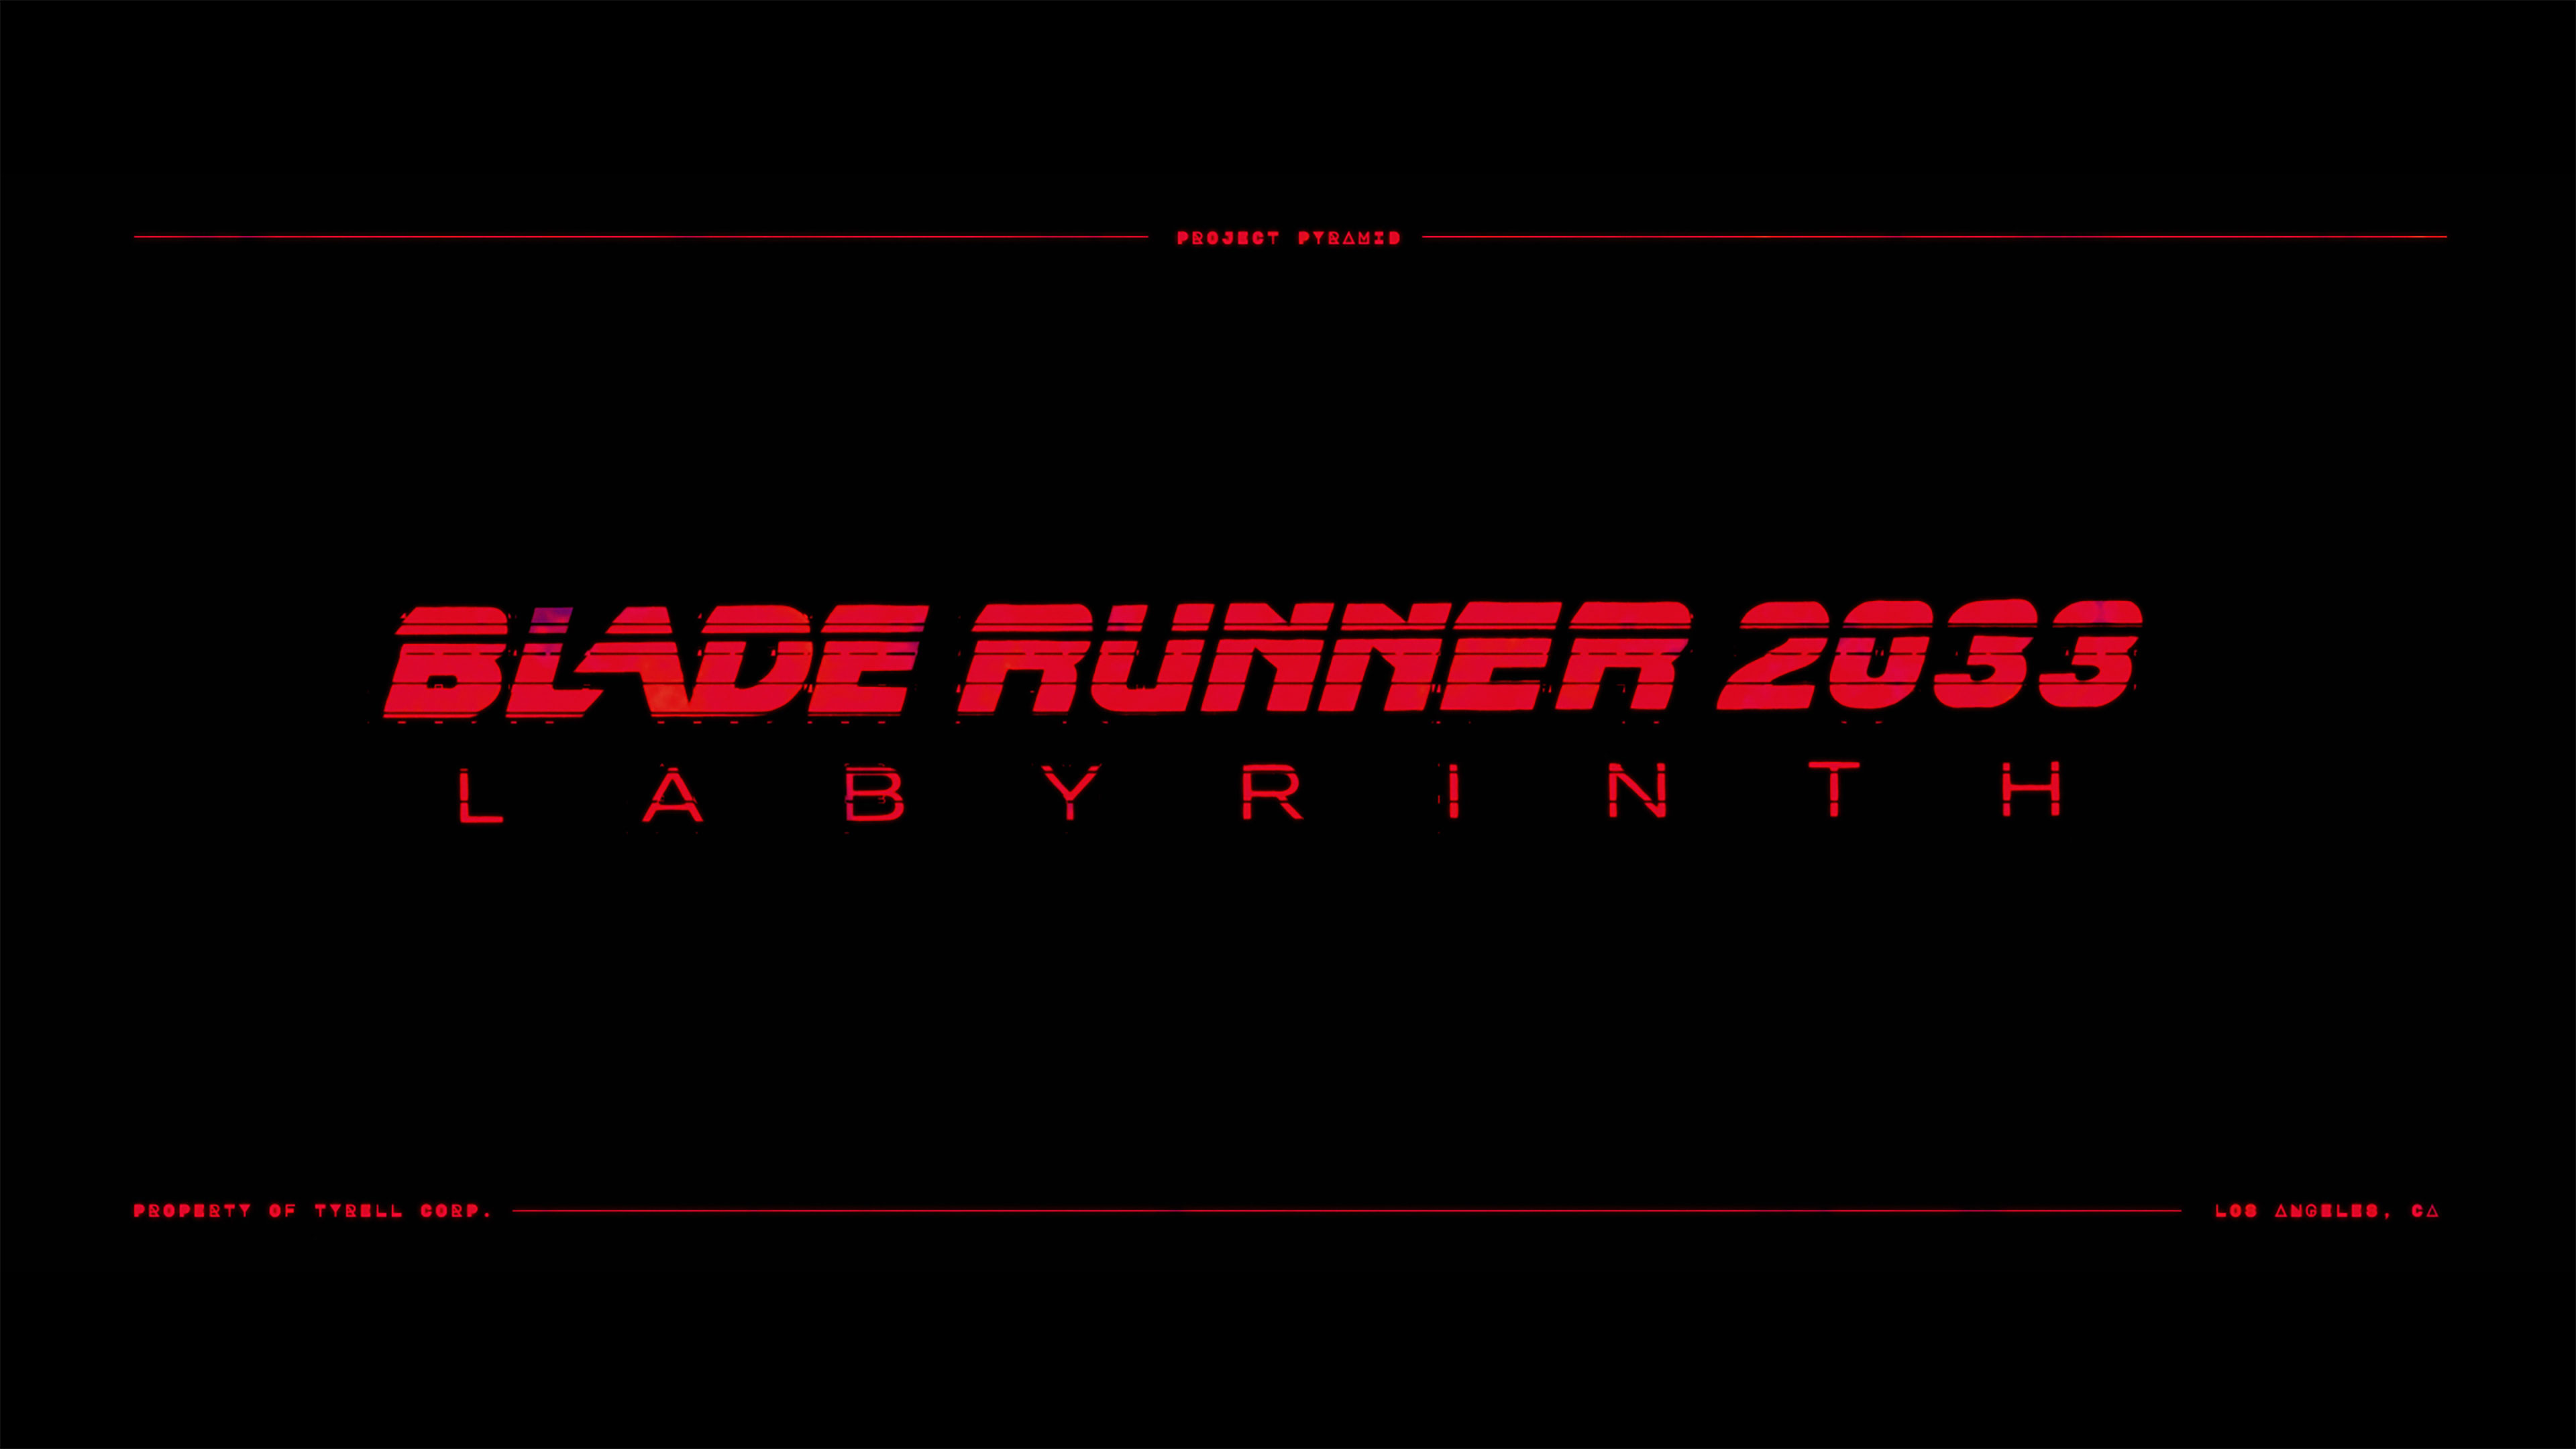 A red logo for Blade Runner 2033: Labyrinth appears on a black background.